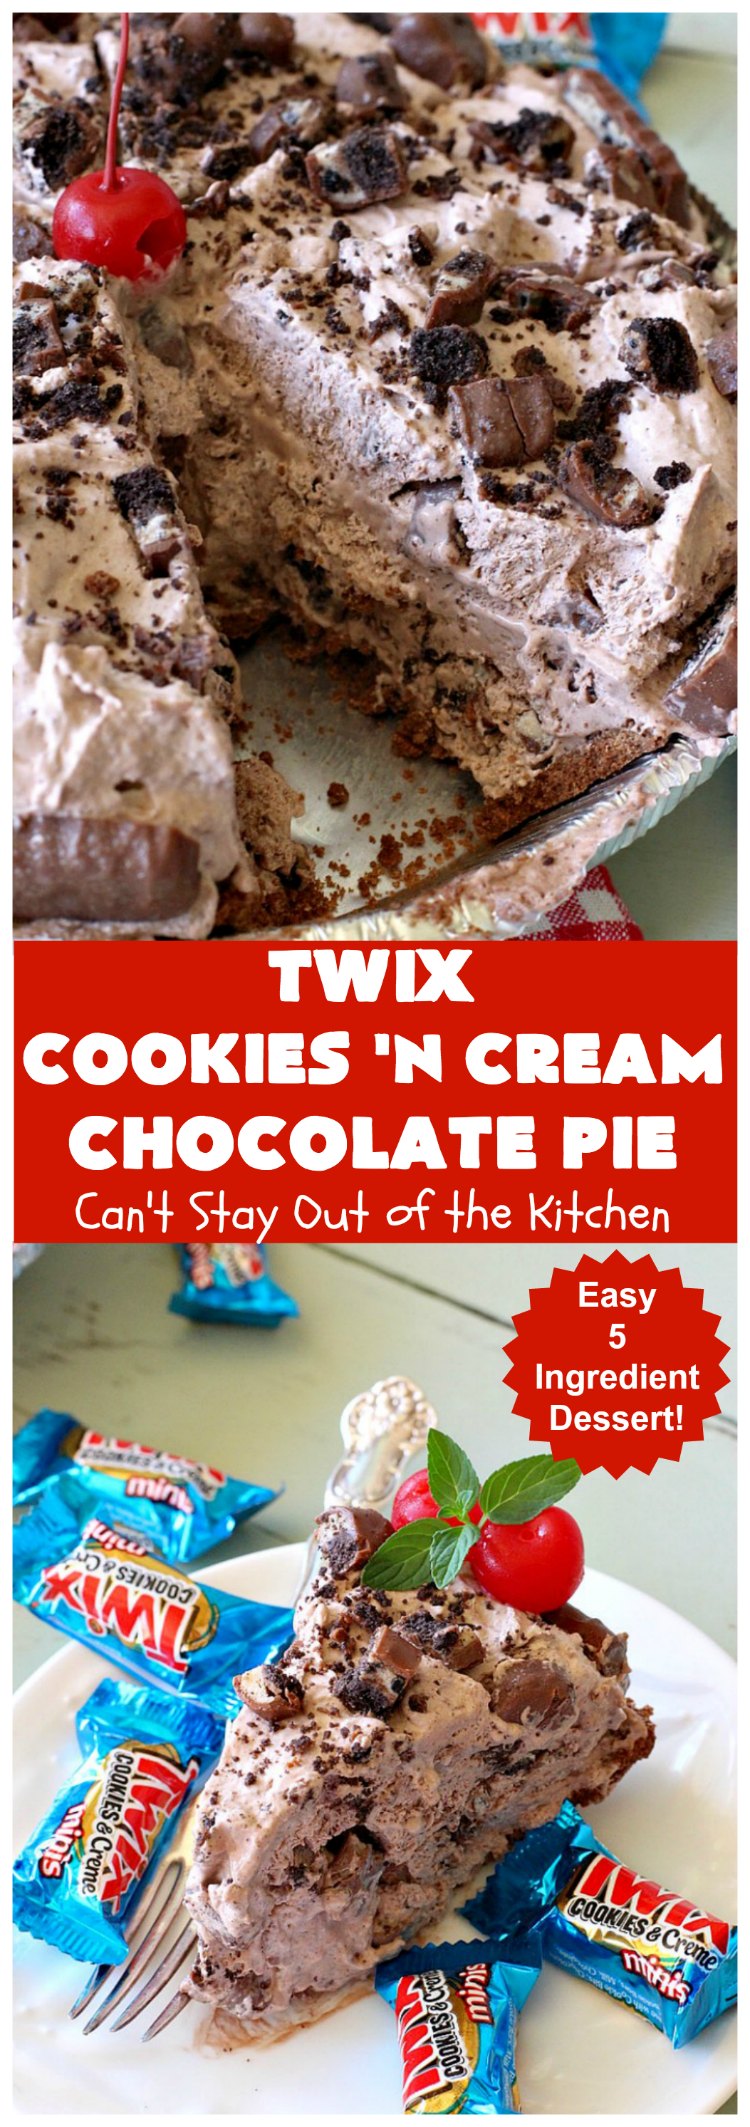 Twix Cookies 'n Cream Chocolate Pie | Can't Stay Out of the Kitchen